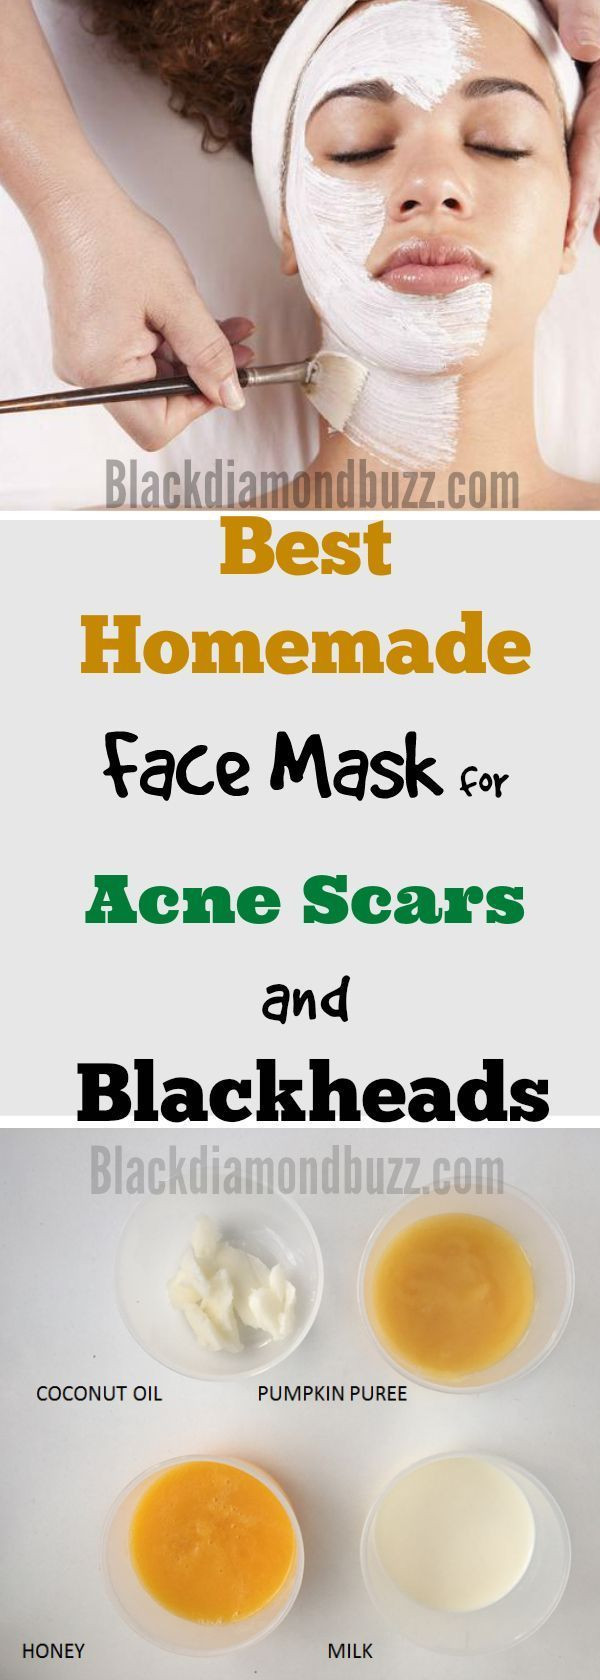 Best DIY Acne Mask
 1290 best Alternative Healing and Health images on